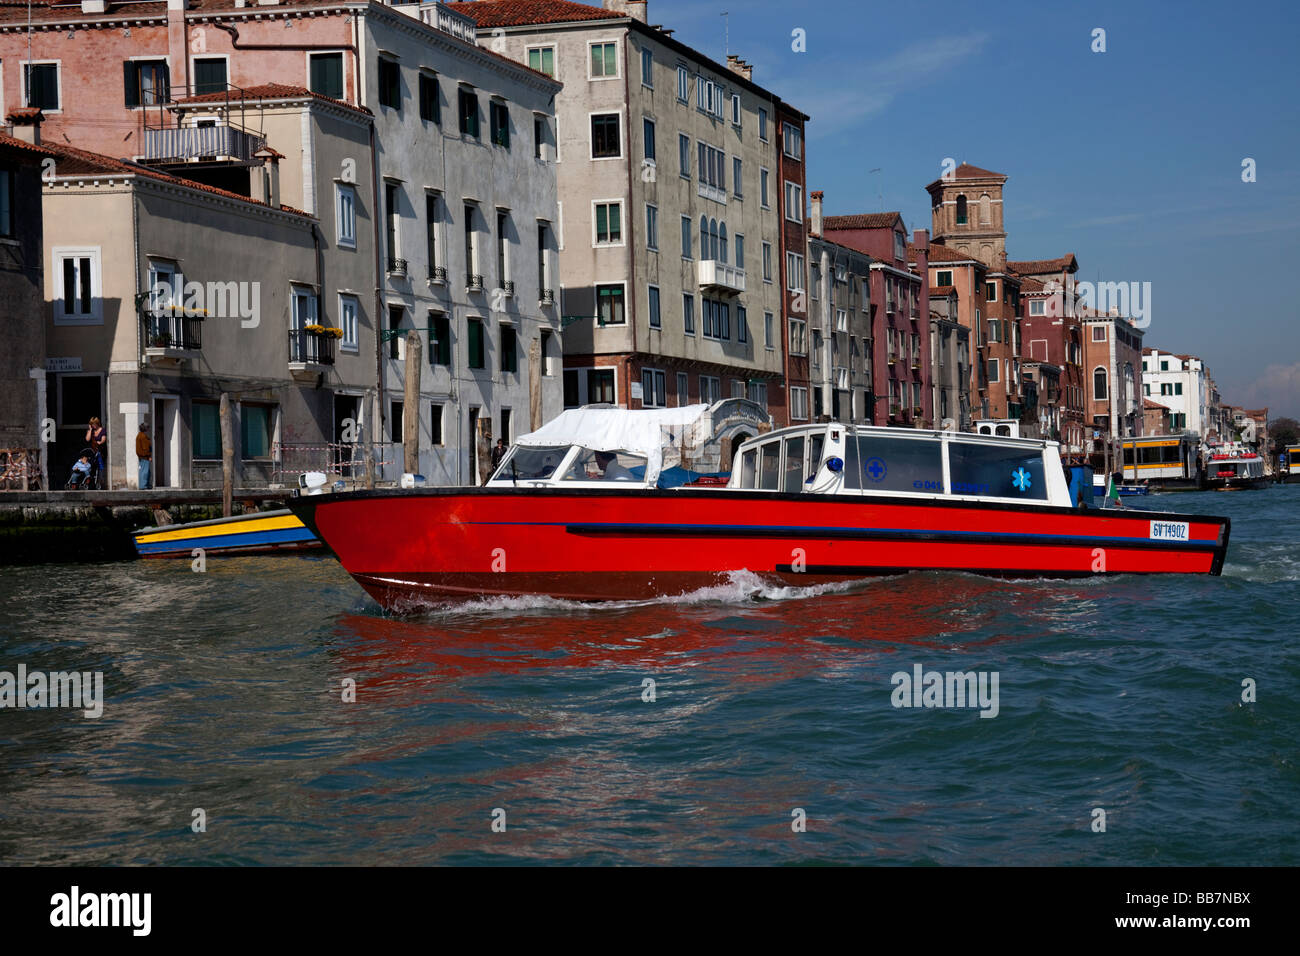 First Aid vessel boat Venice, Italy Stock Photo